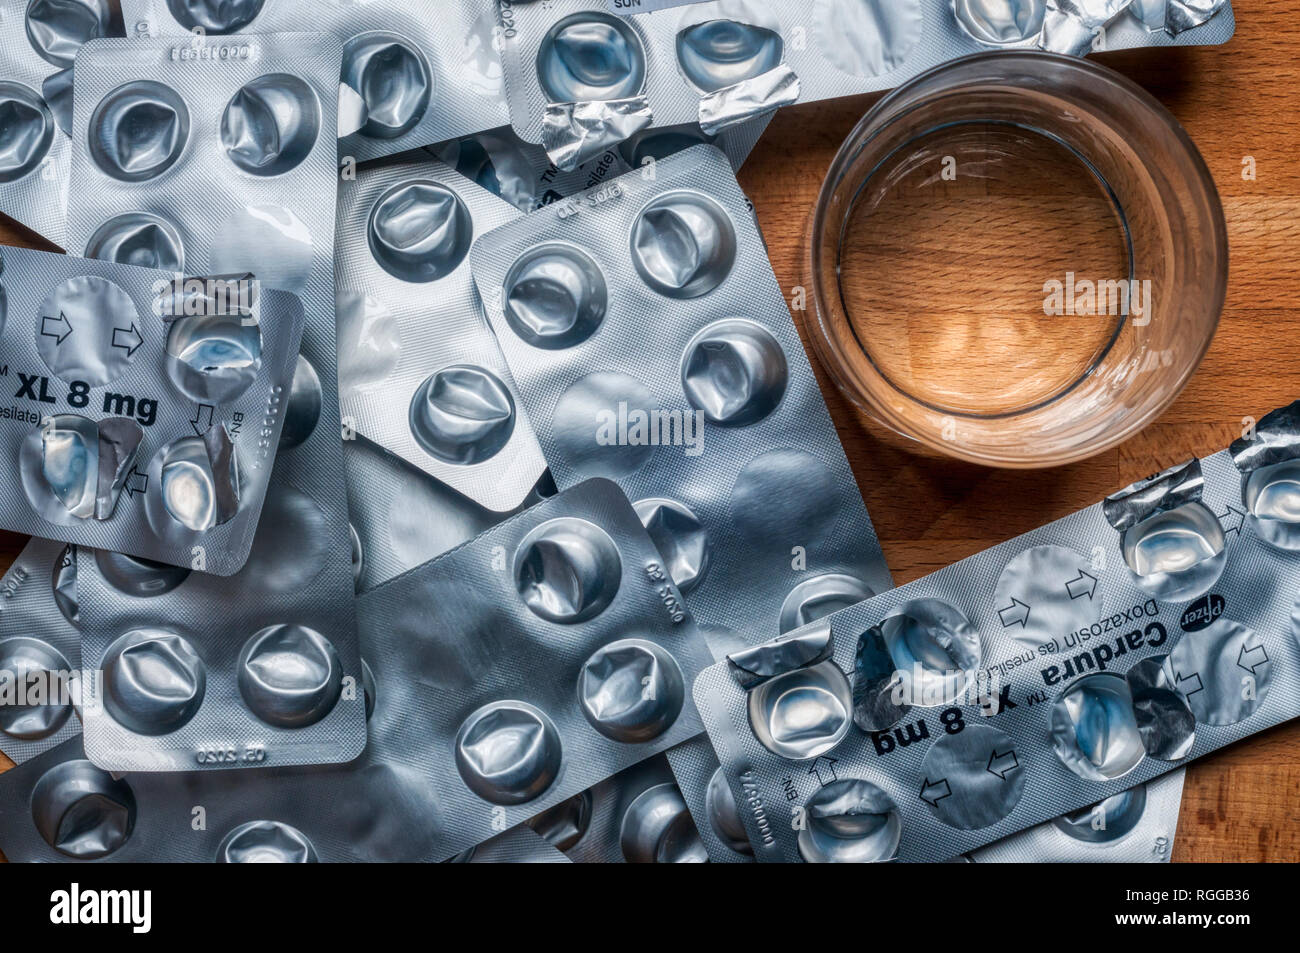 Empty used blister packs of tablets used to control high blood pressure on a bedside table with a glass of water. Medical shortage concept. Stock Photo